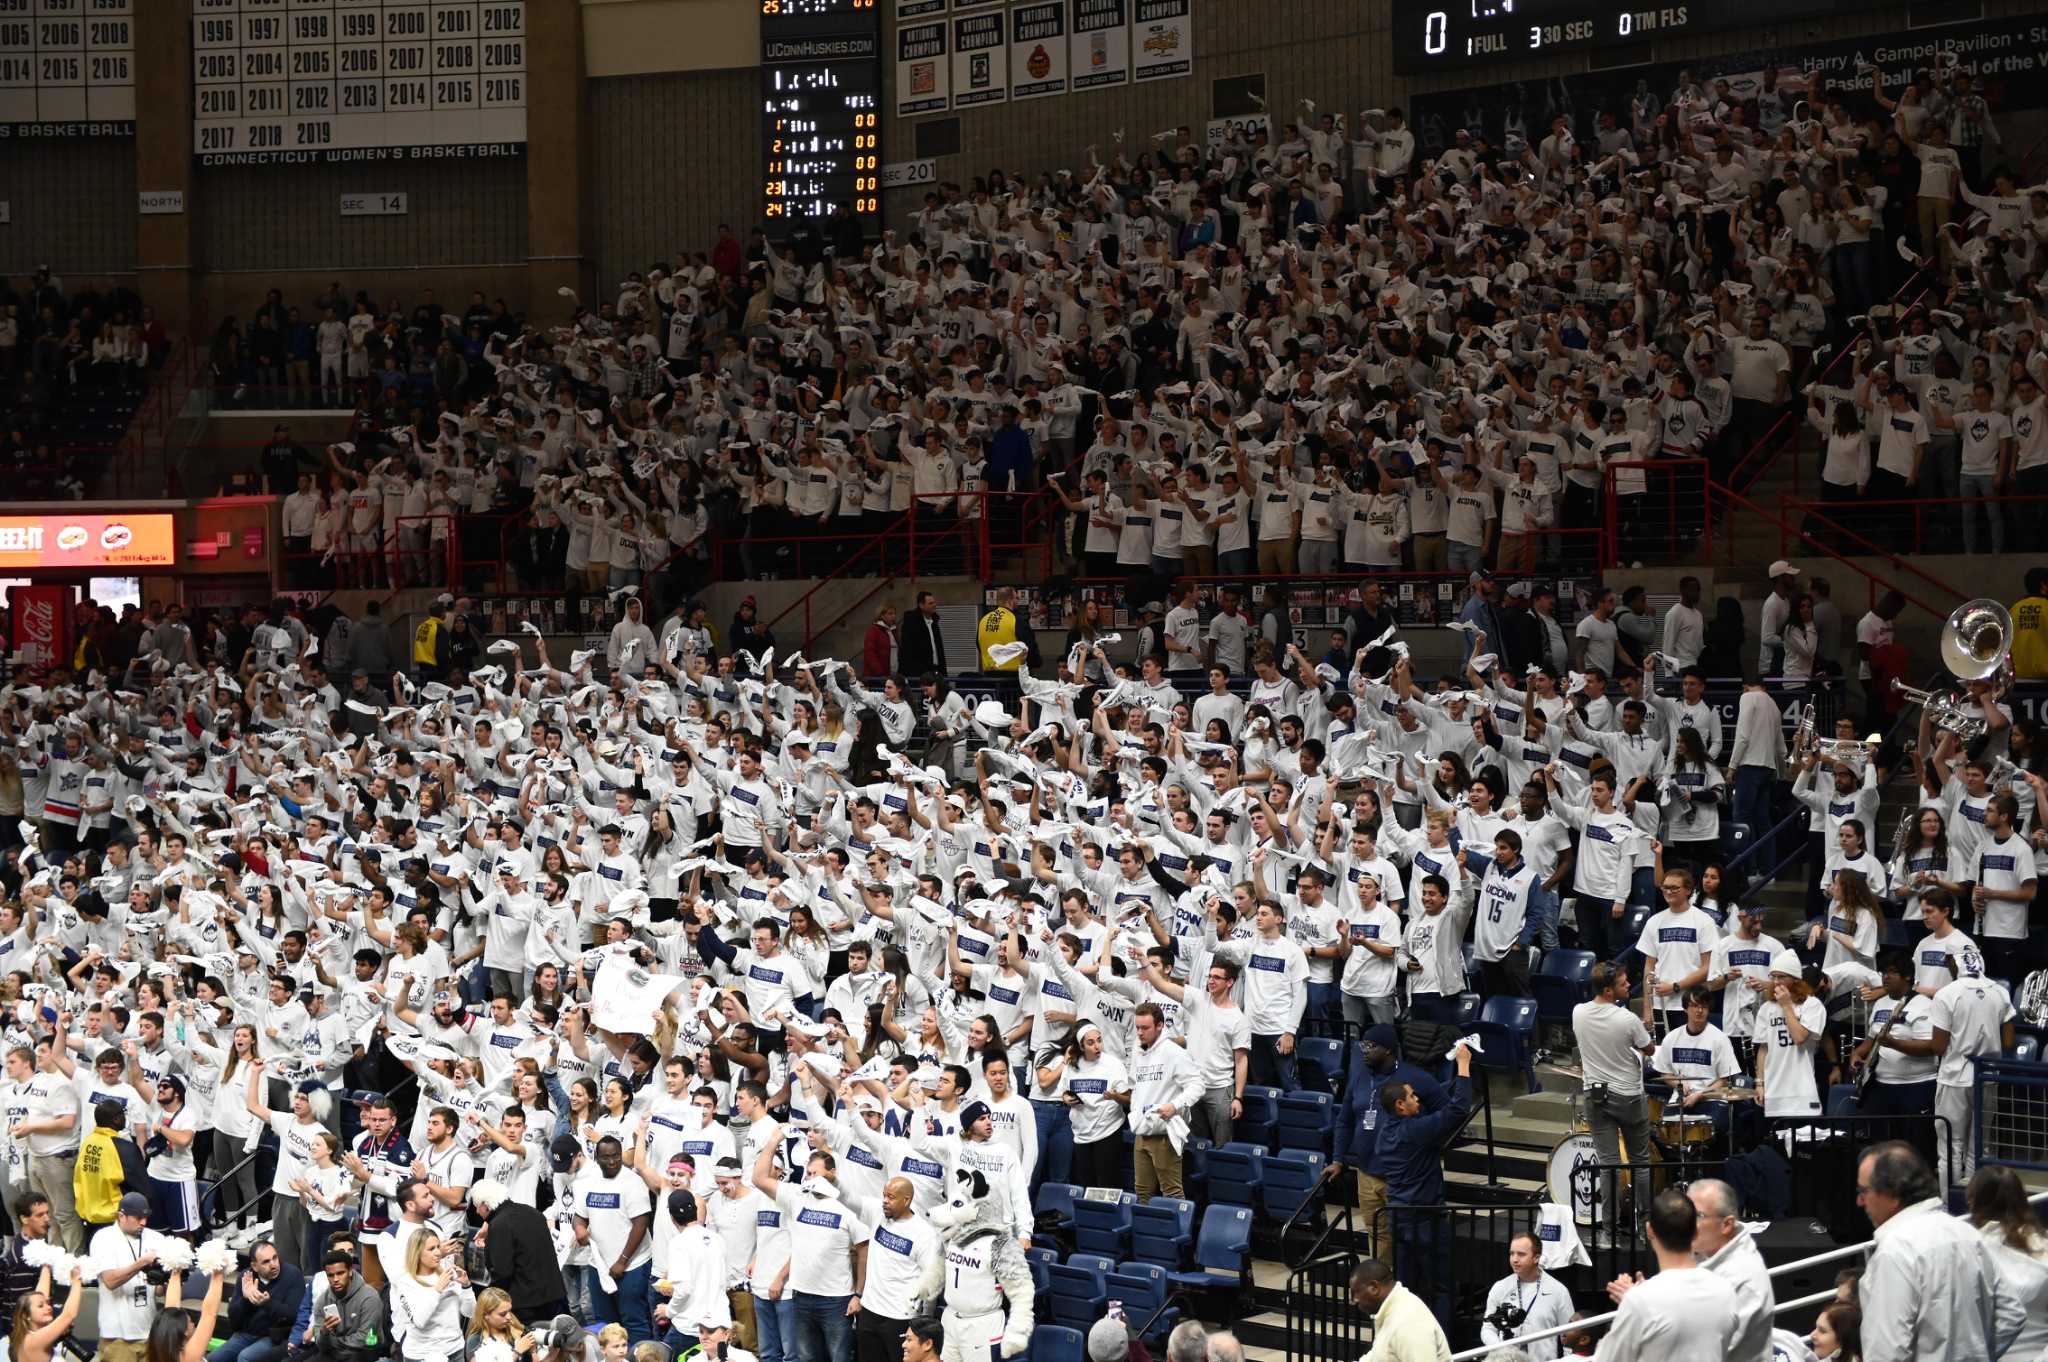 UConn's lease with the XL Center is set to expire. Will more games be  played at Gampel Pavilion?